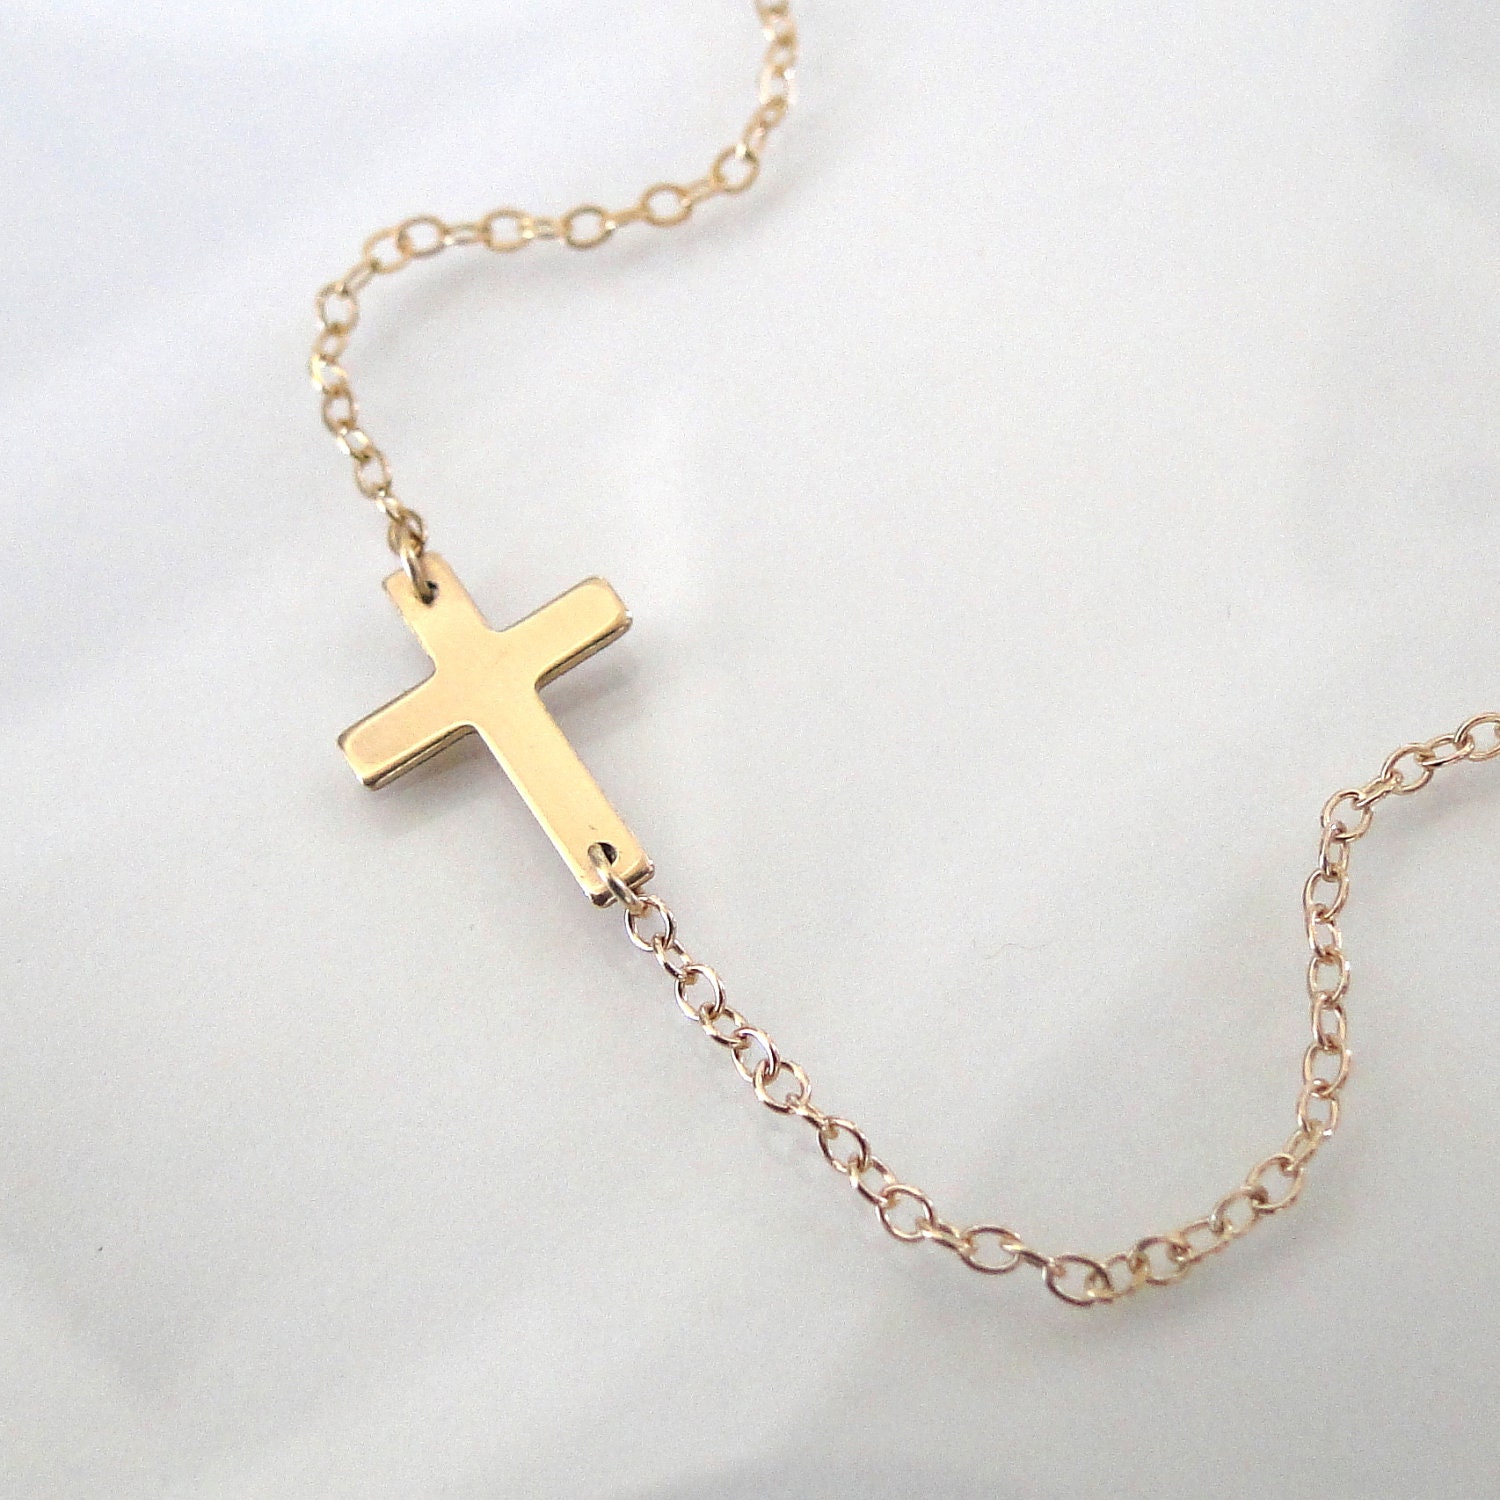 Gothic Cross Necklaces For Women Sideways cross necklace